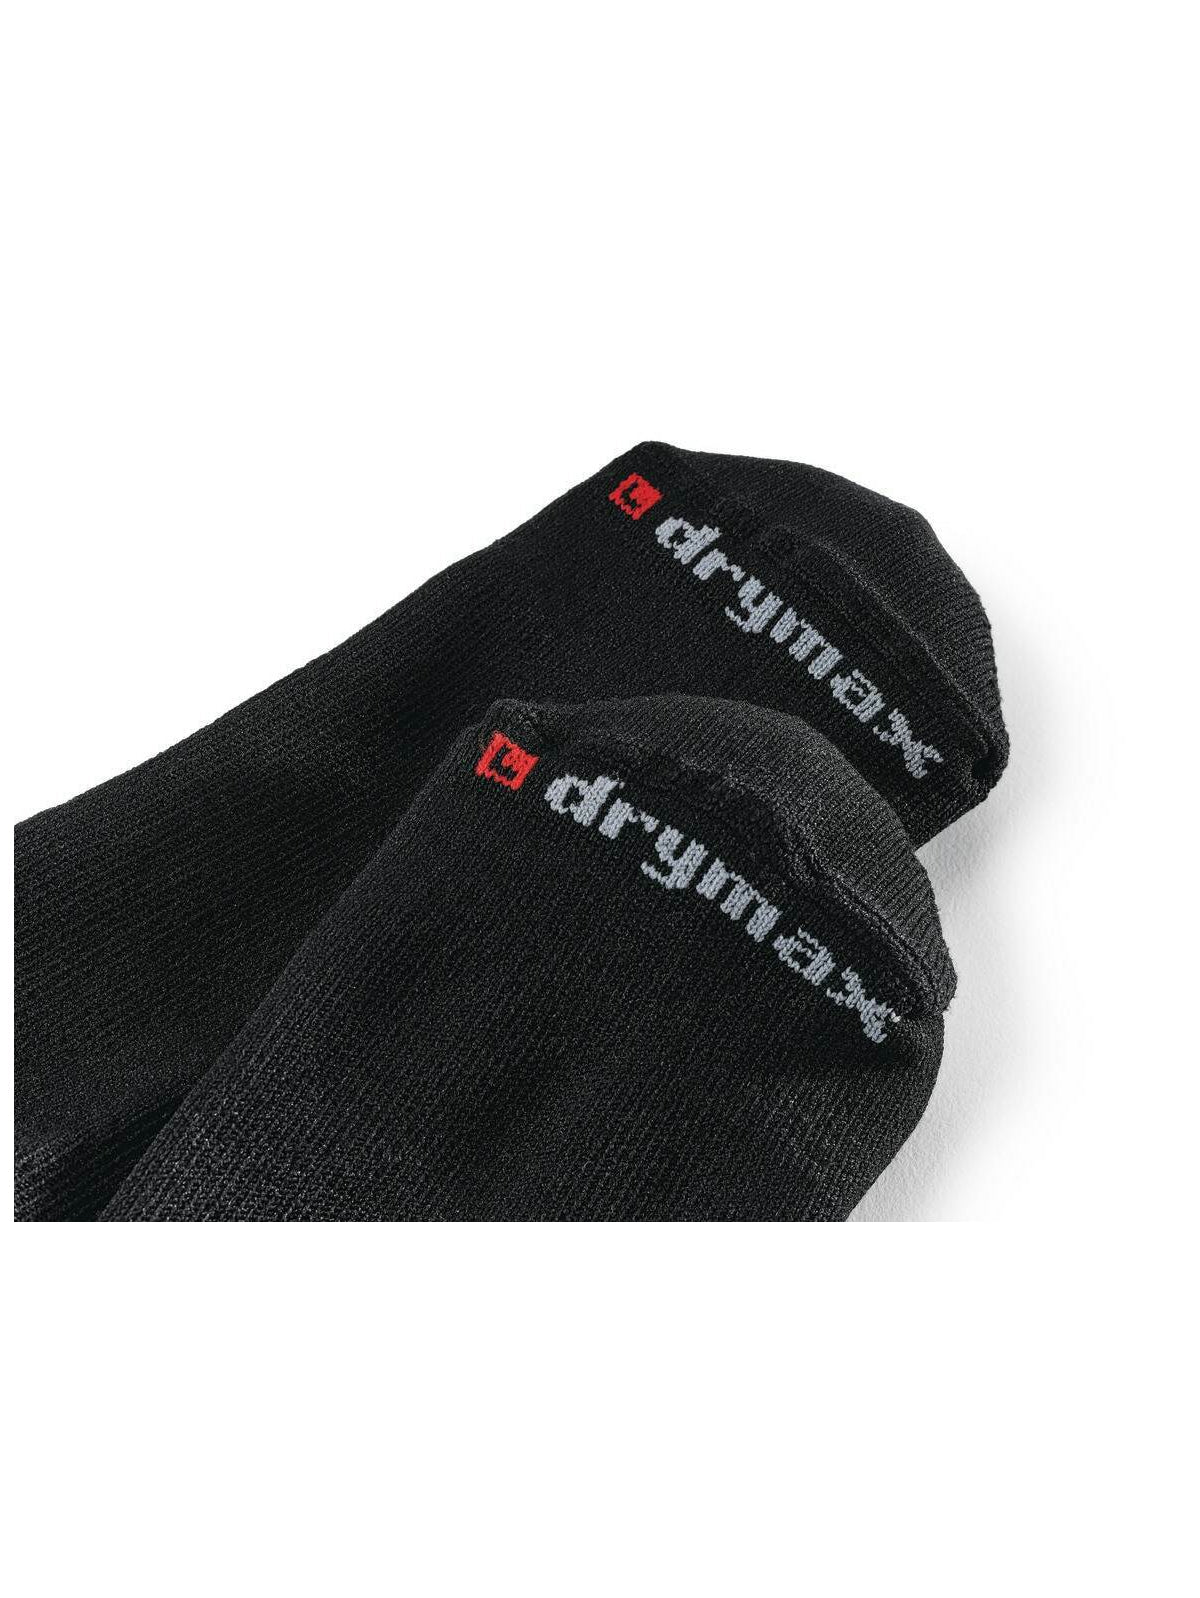 Unisex Crew Socks Black by Shoes For Crews -  ChefsCotton